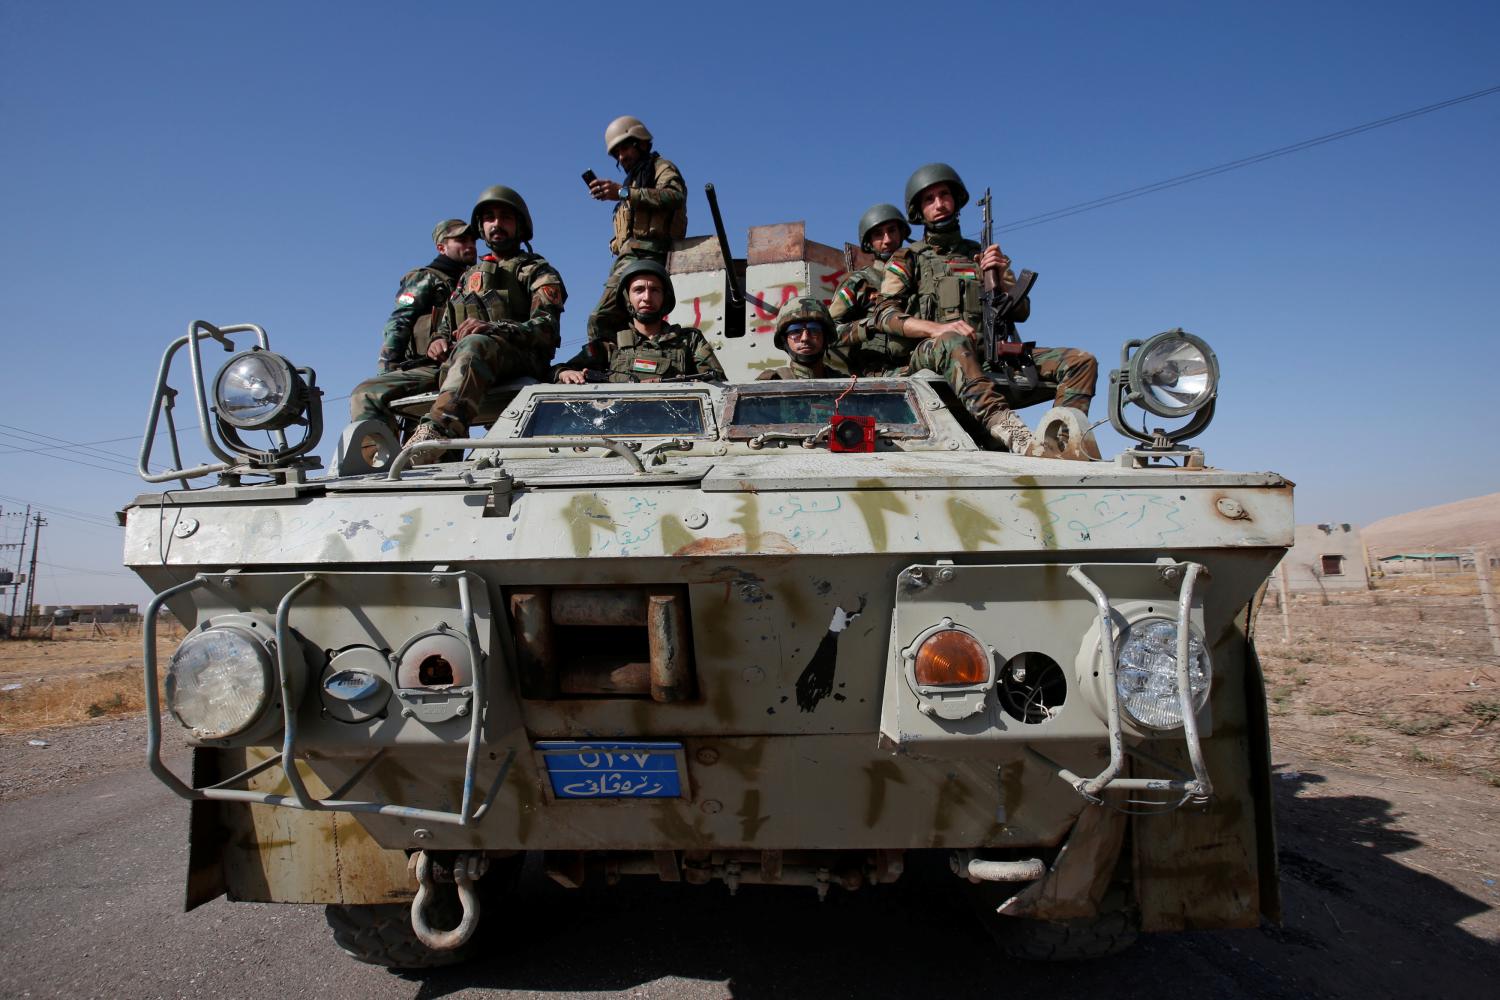 Syrian Kurdish fighters ride a military vehicle in the town of Bashiqa, after it was recaptured from the Islamic State, east of Mosul, Iraq, November 12, 2016. Picture taken November 12, 2016. REUTERS/Azad Lashkari - RTX2TLWS